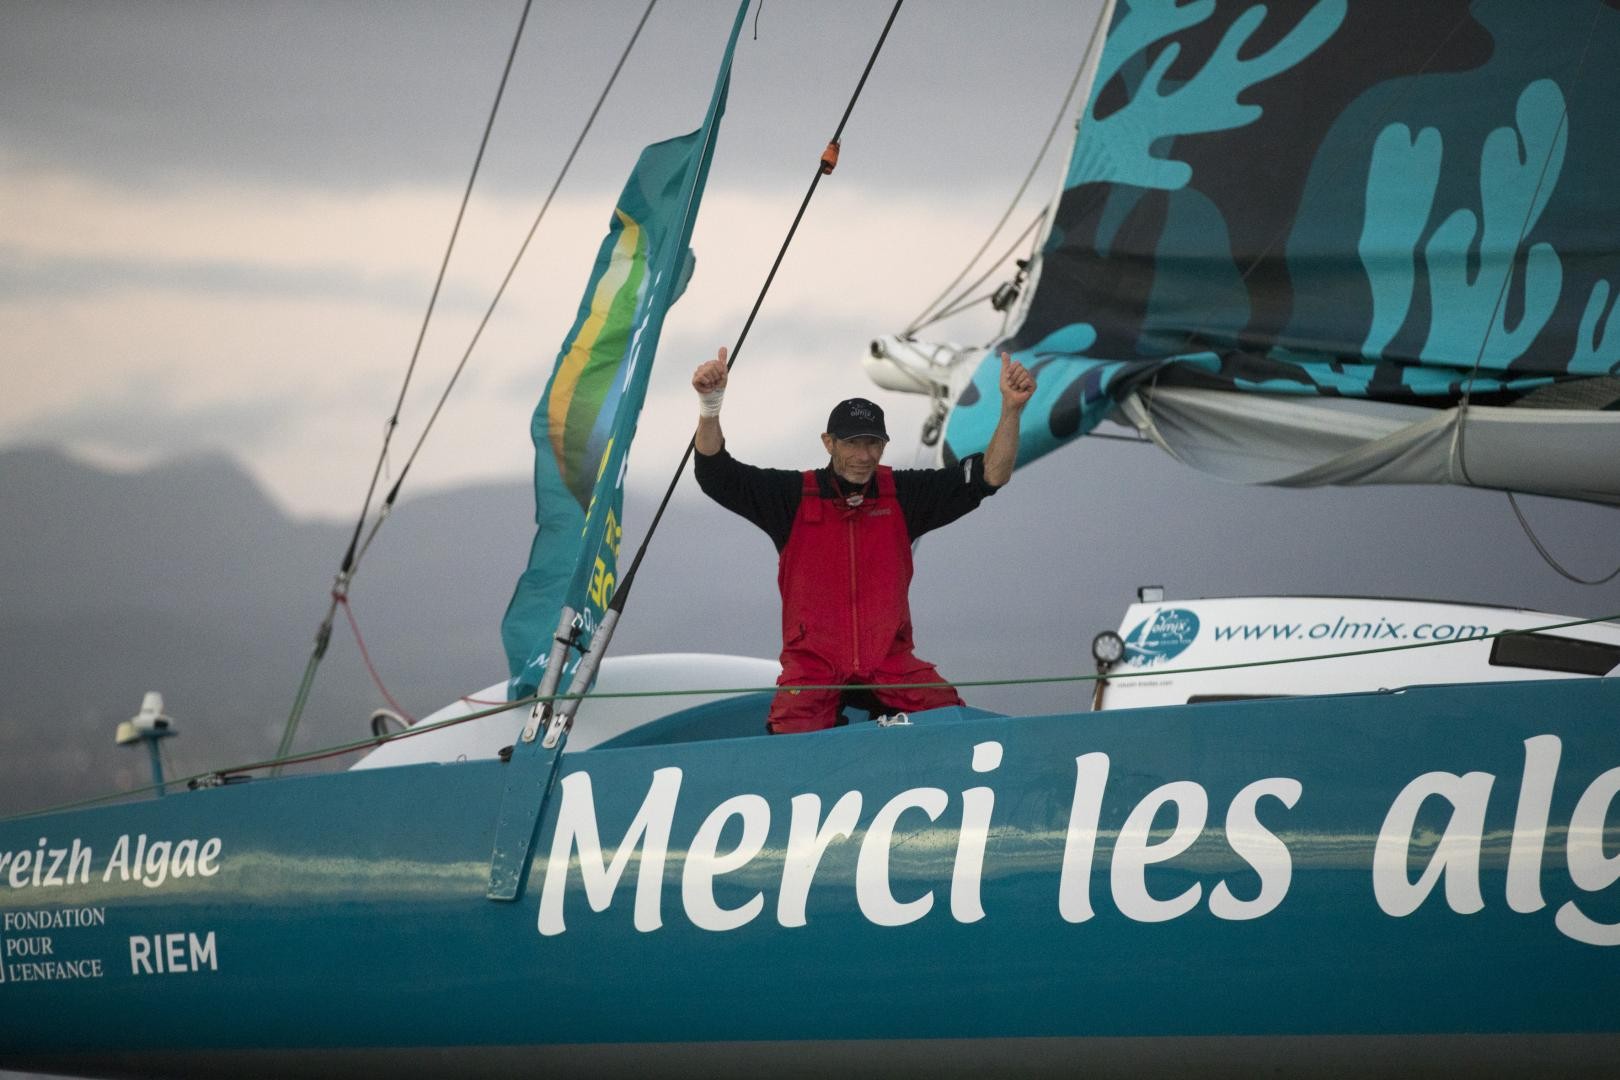 French sailor Pierre Antoine wins the Rhum Multi class on Olmix.